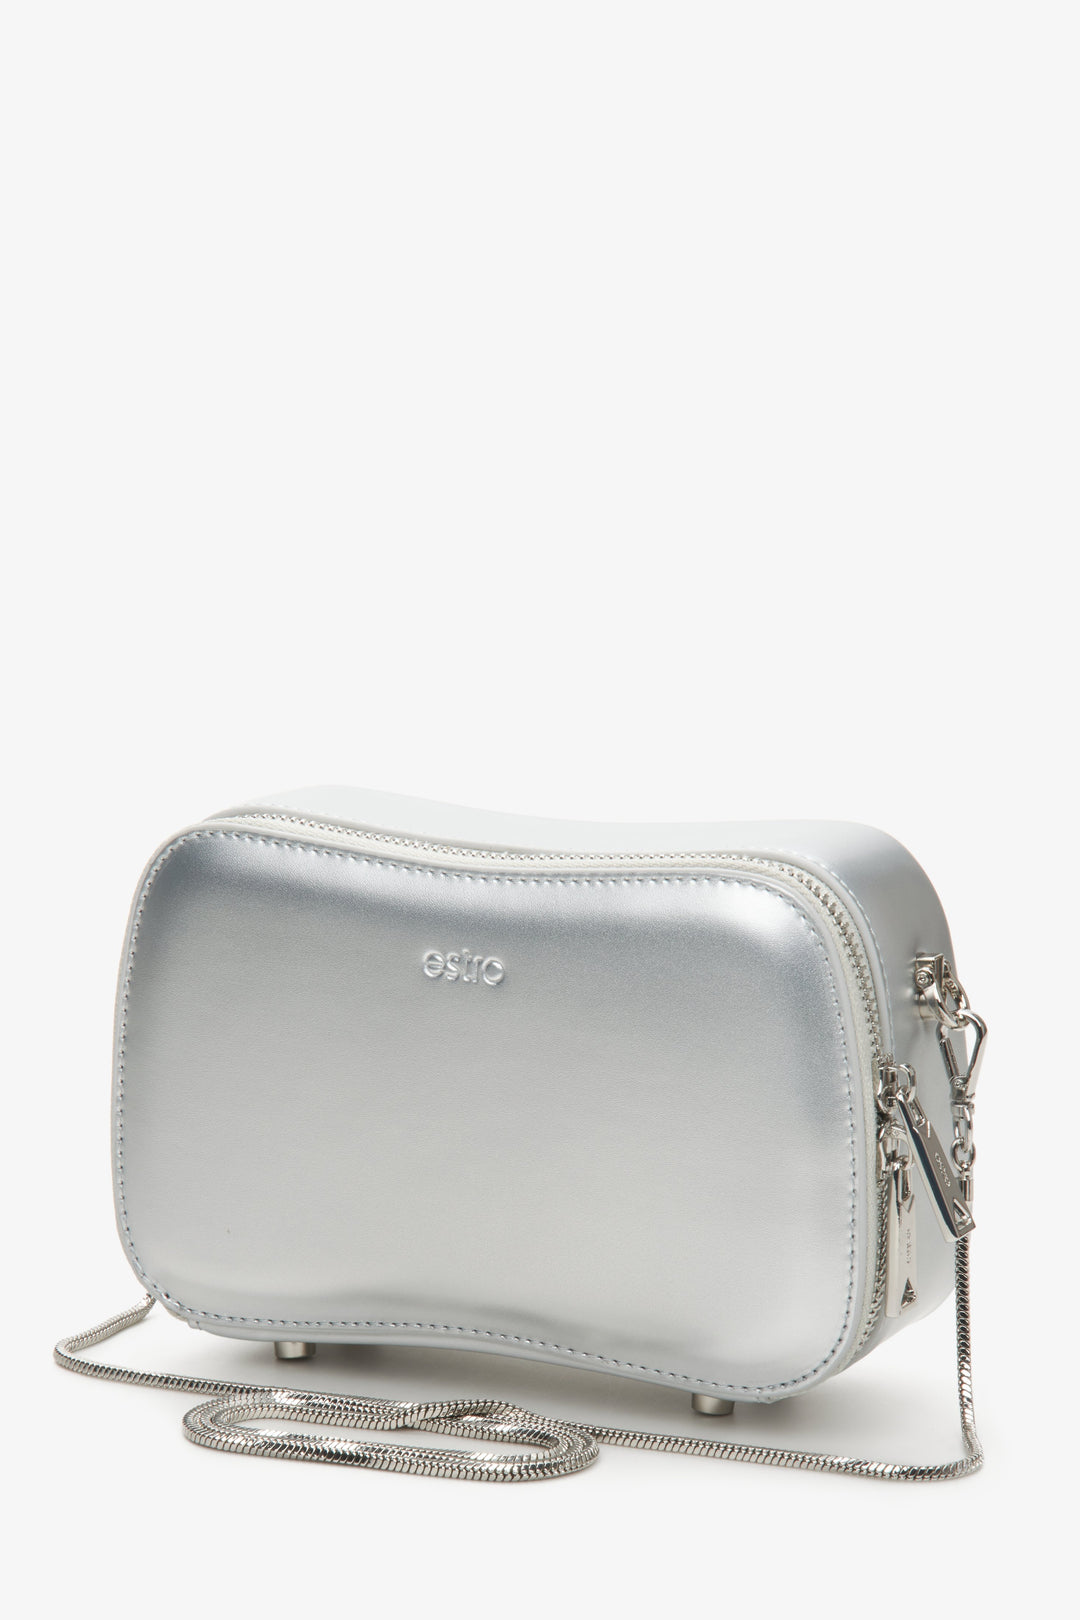 Women's Small Shoulder Bag in Silver with Chain Estro ER00114351